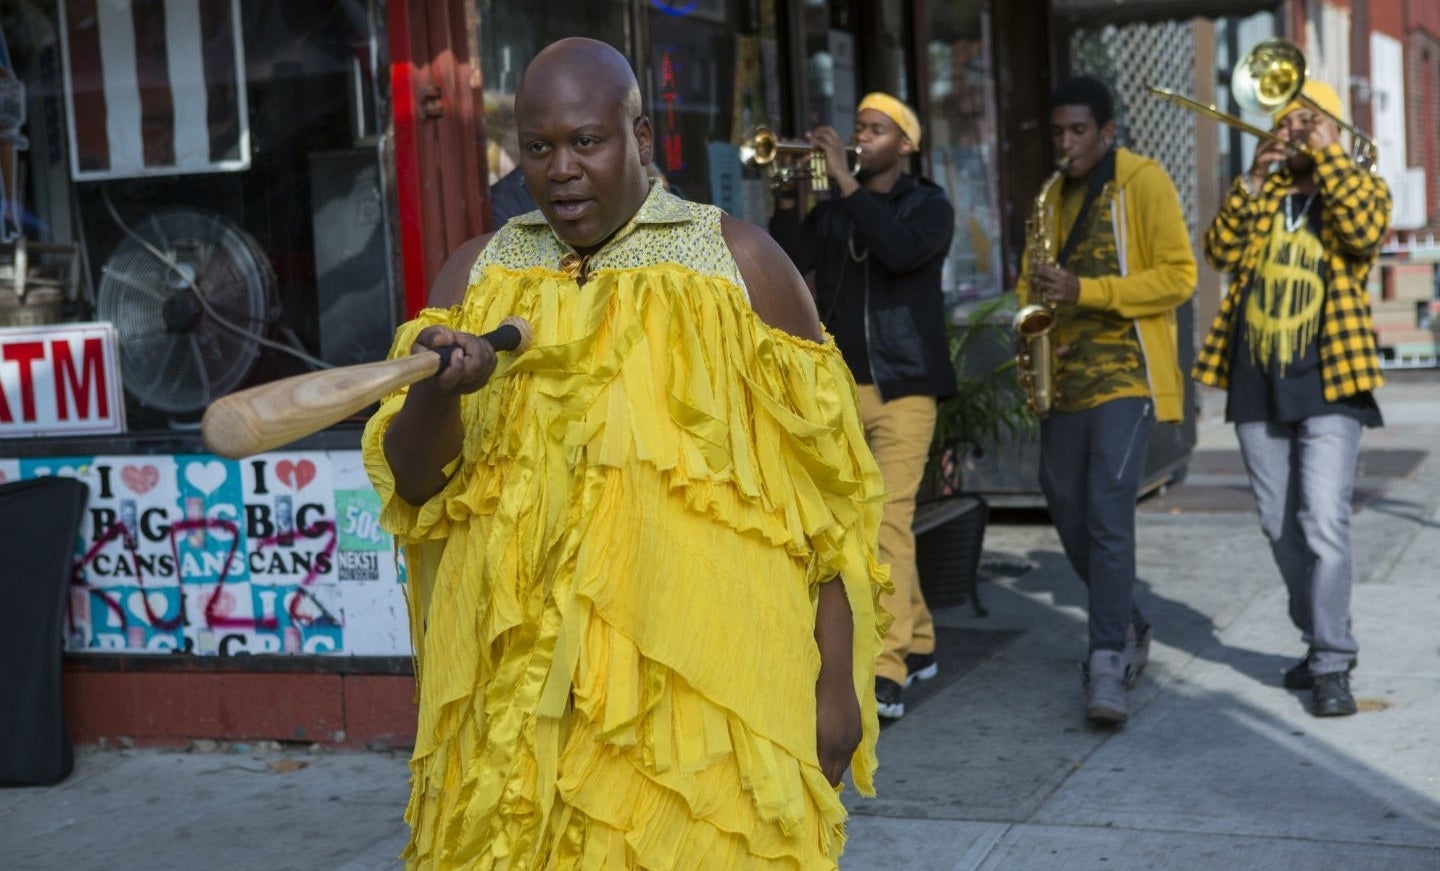 Tituss Burgess as &quot;Titus&quot; is doing a Beyoncé-inspired parody video (&quot;Lemonade&quot;), and he&#x27;s seen holding a bat wearing a frilly dress in Unbreakable Kimmy Schmidt